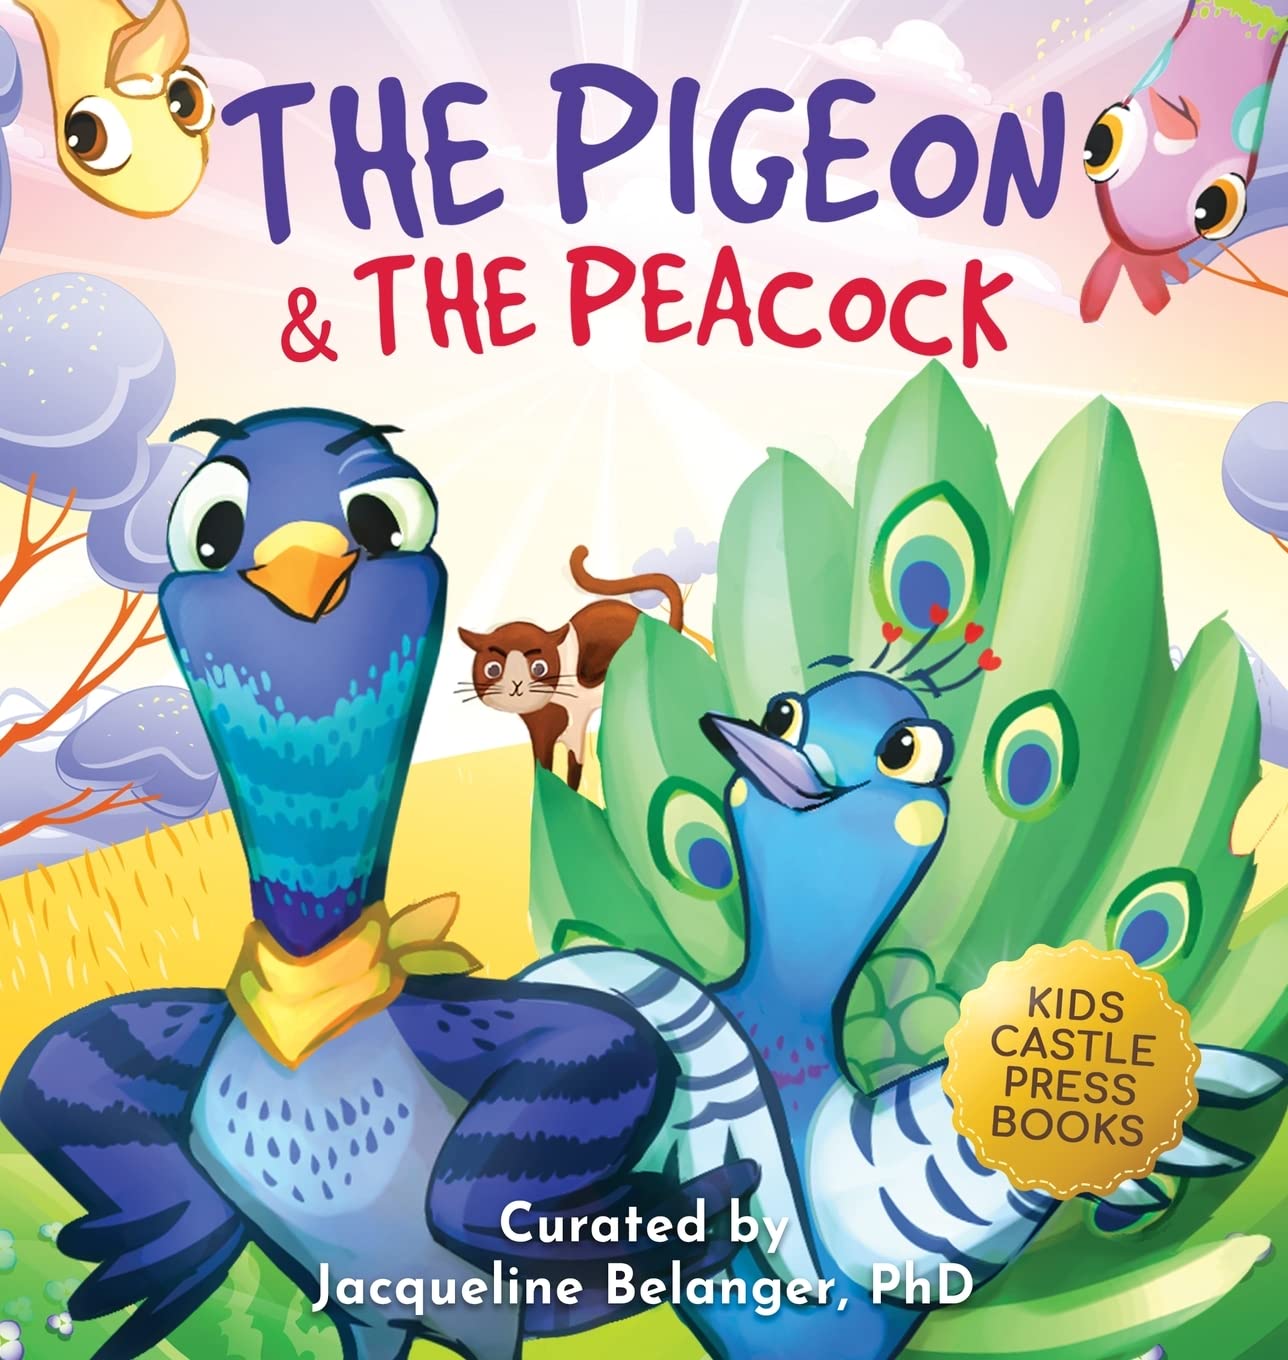 The Pigeon & the Peacock